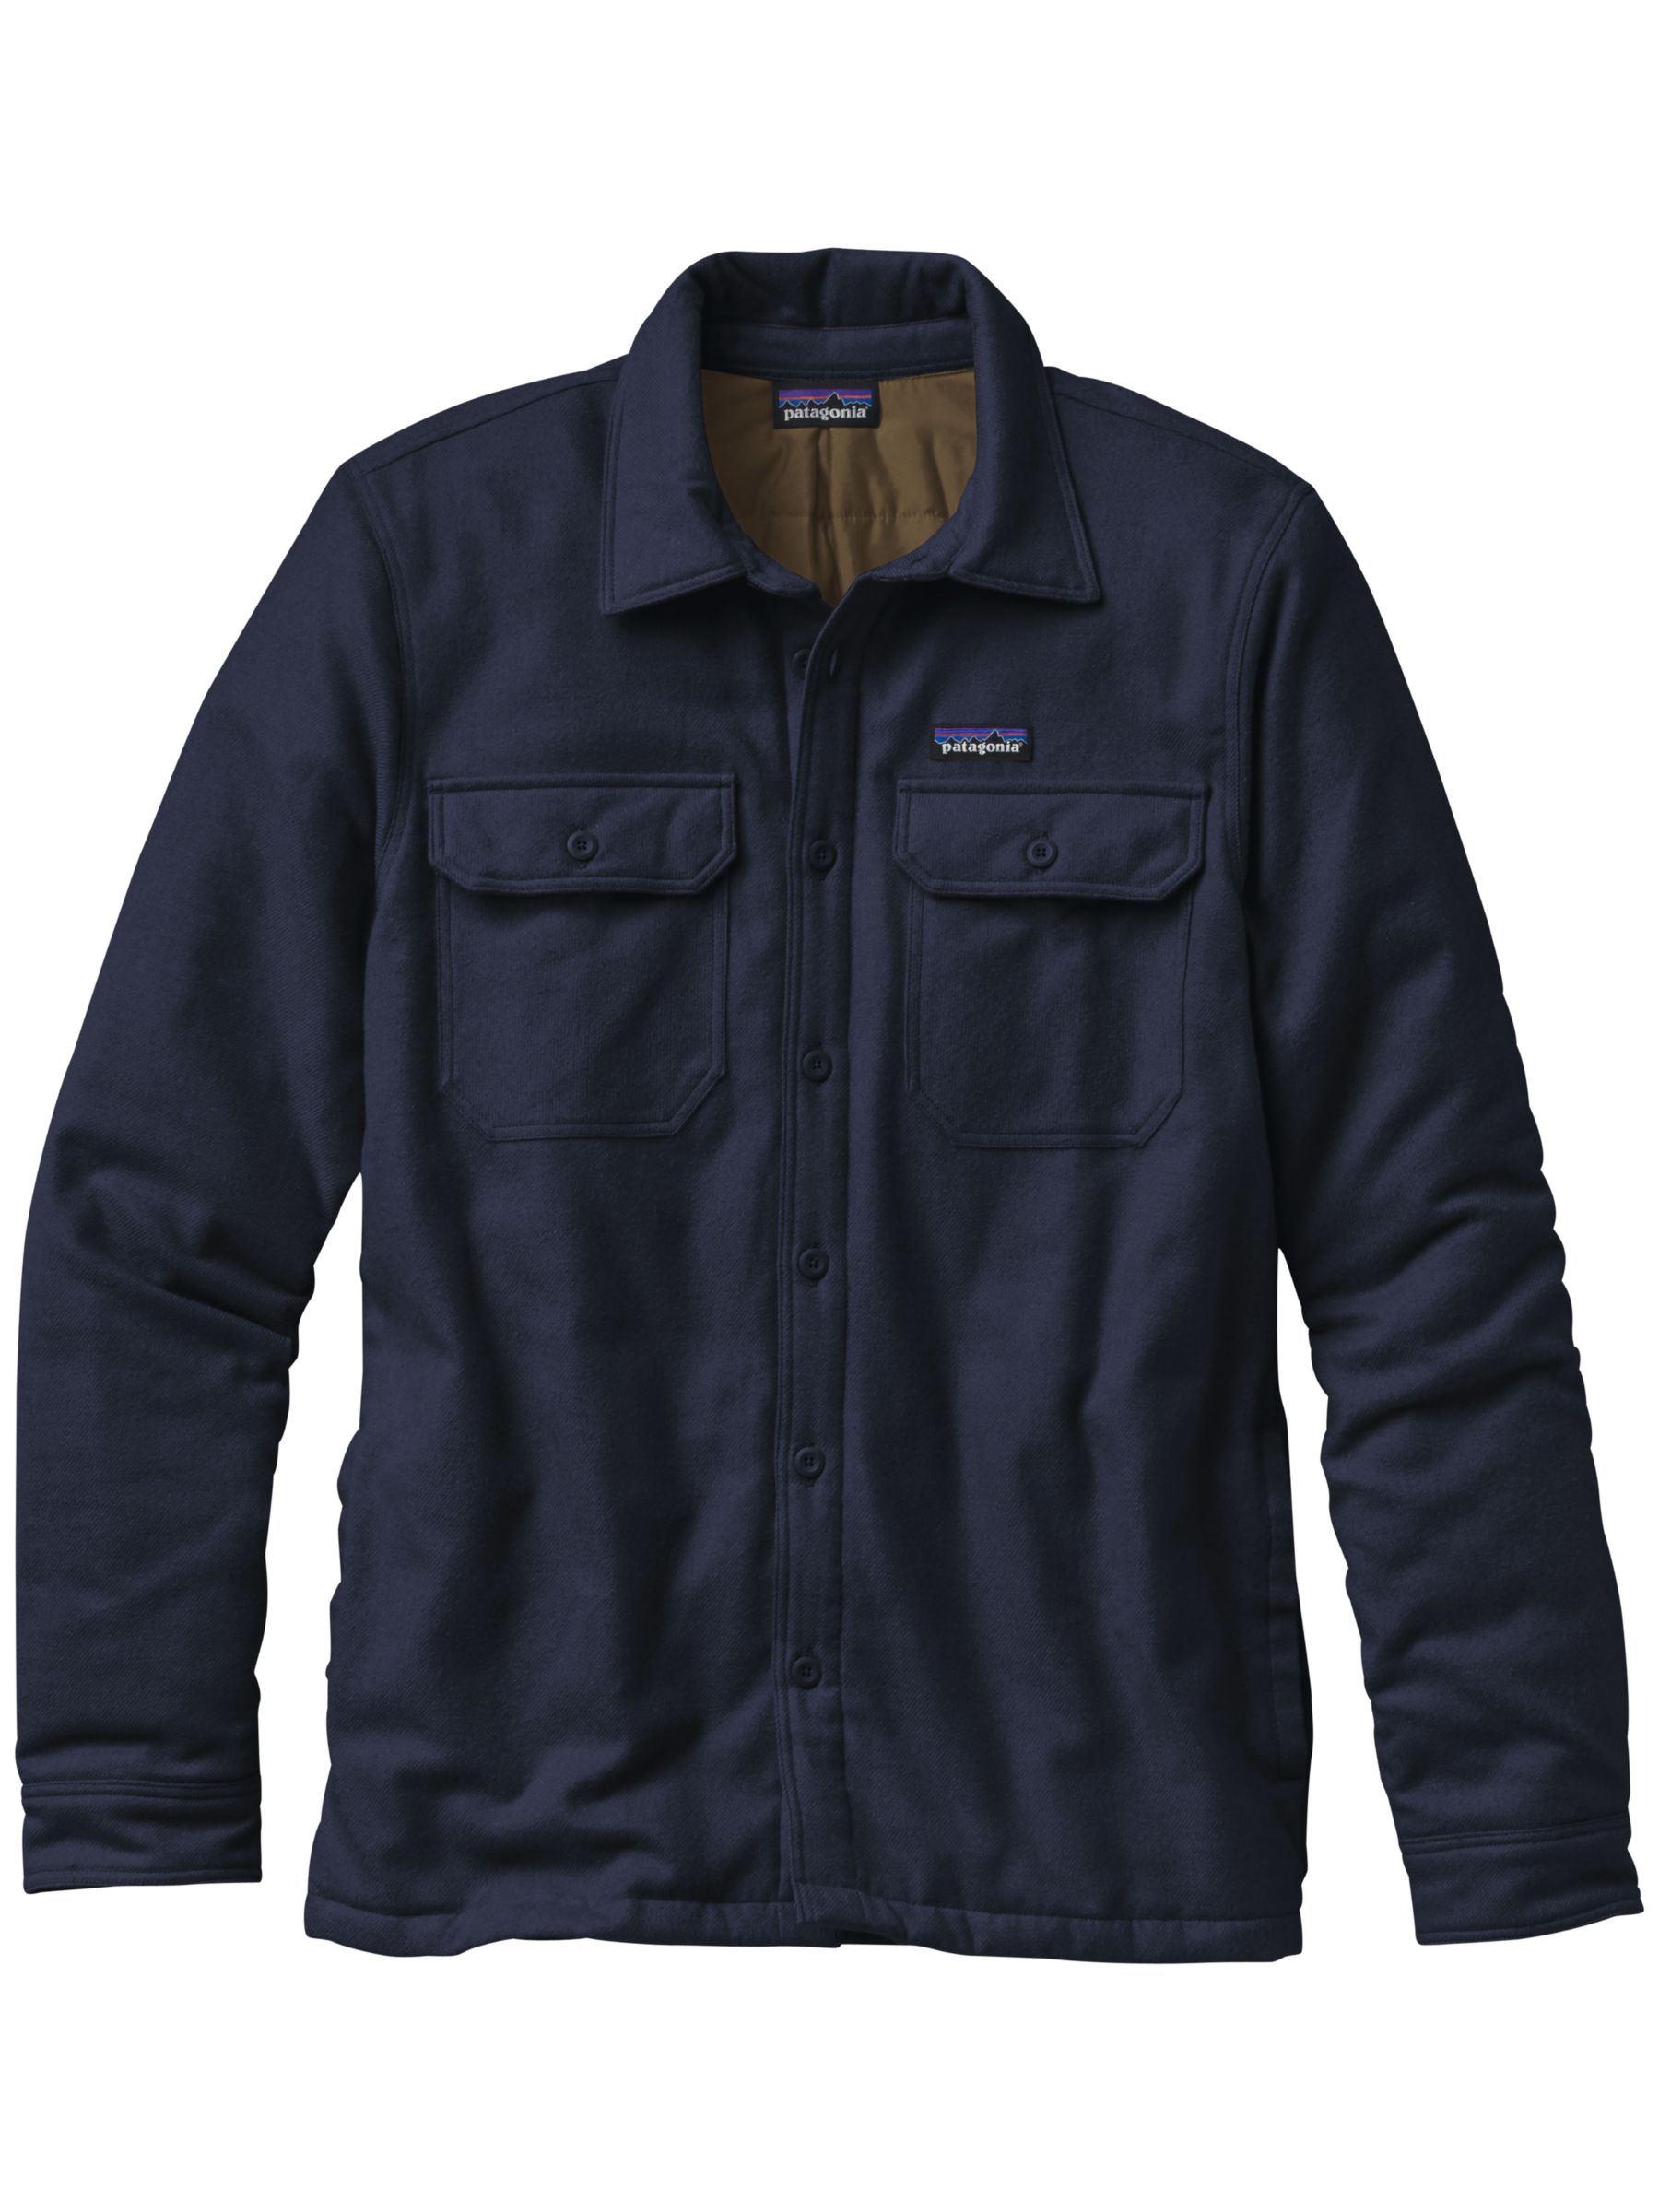 Patagonia Insulated Fjord Flannel Men's Jacket, Navy Blue